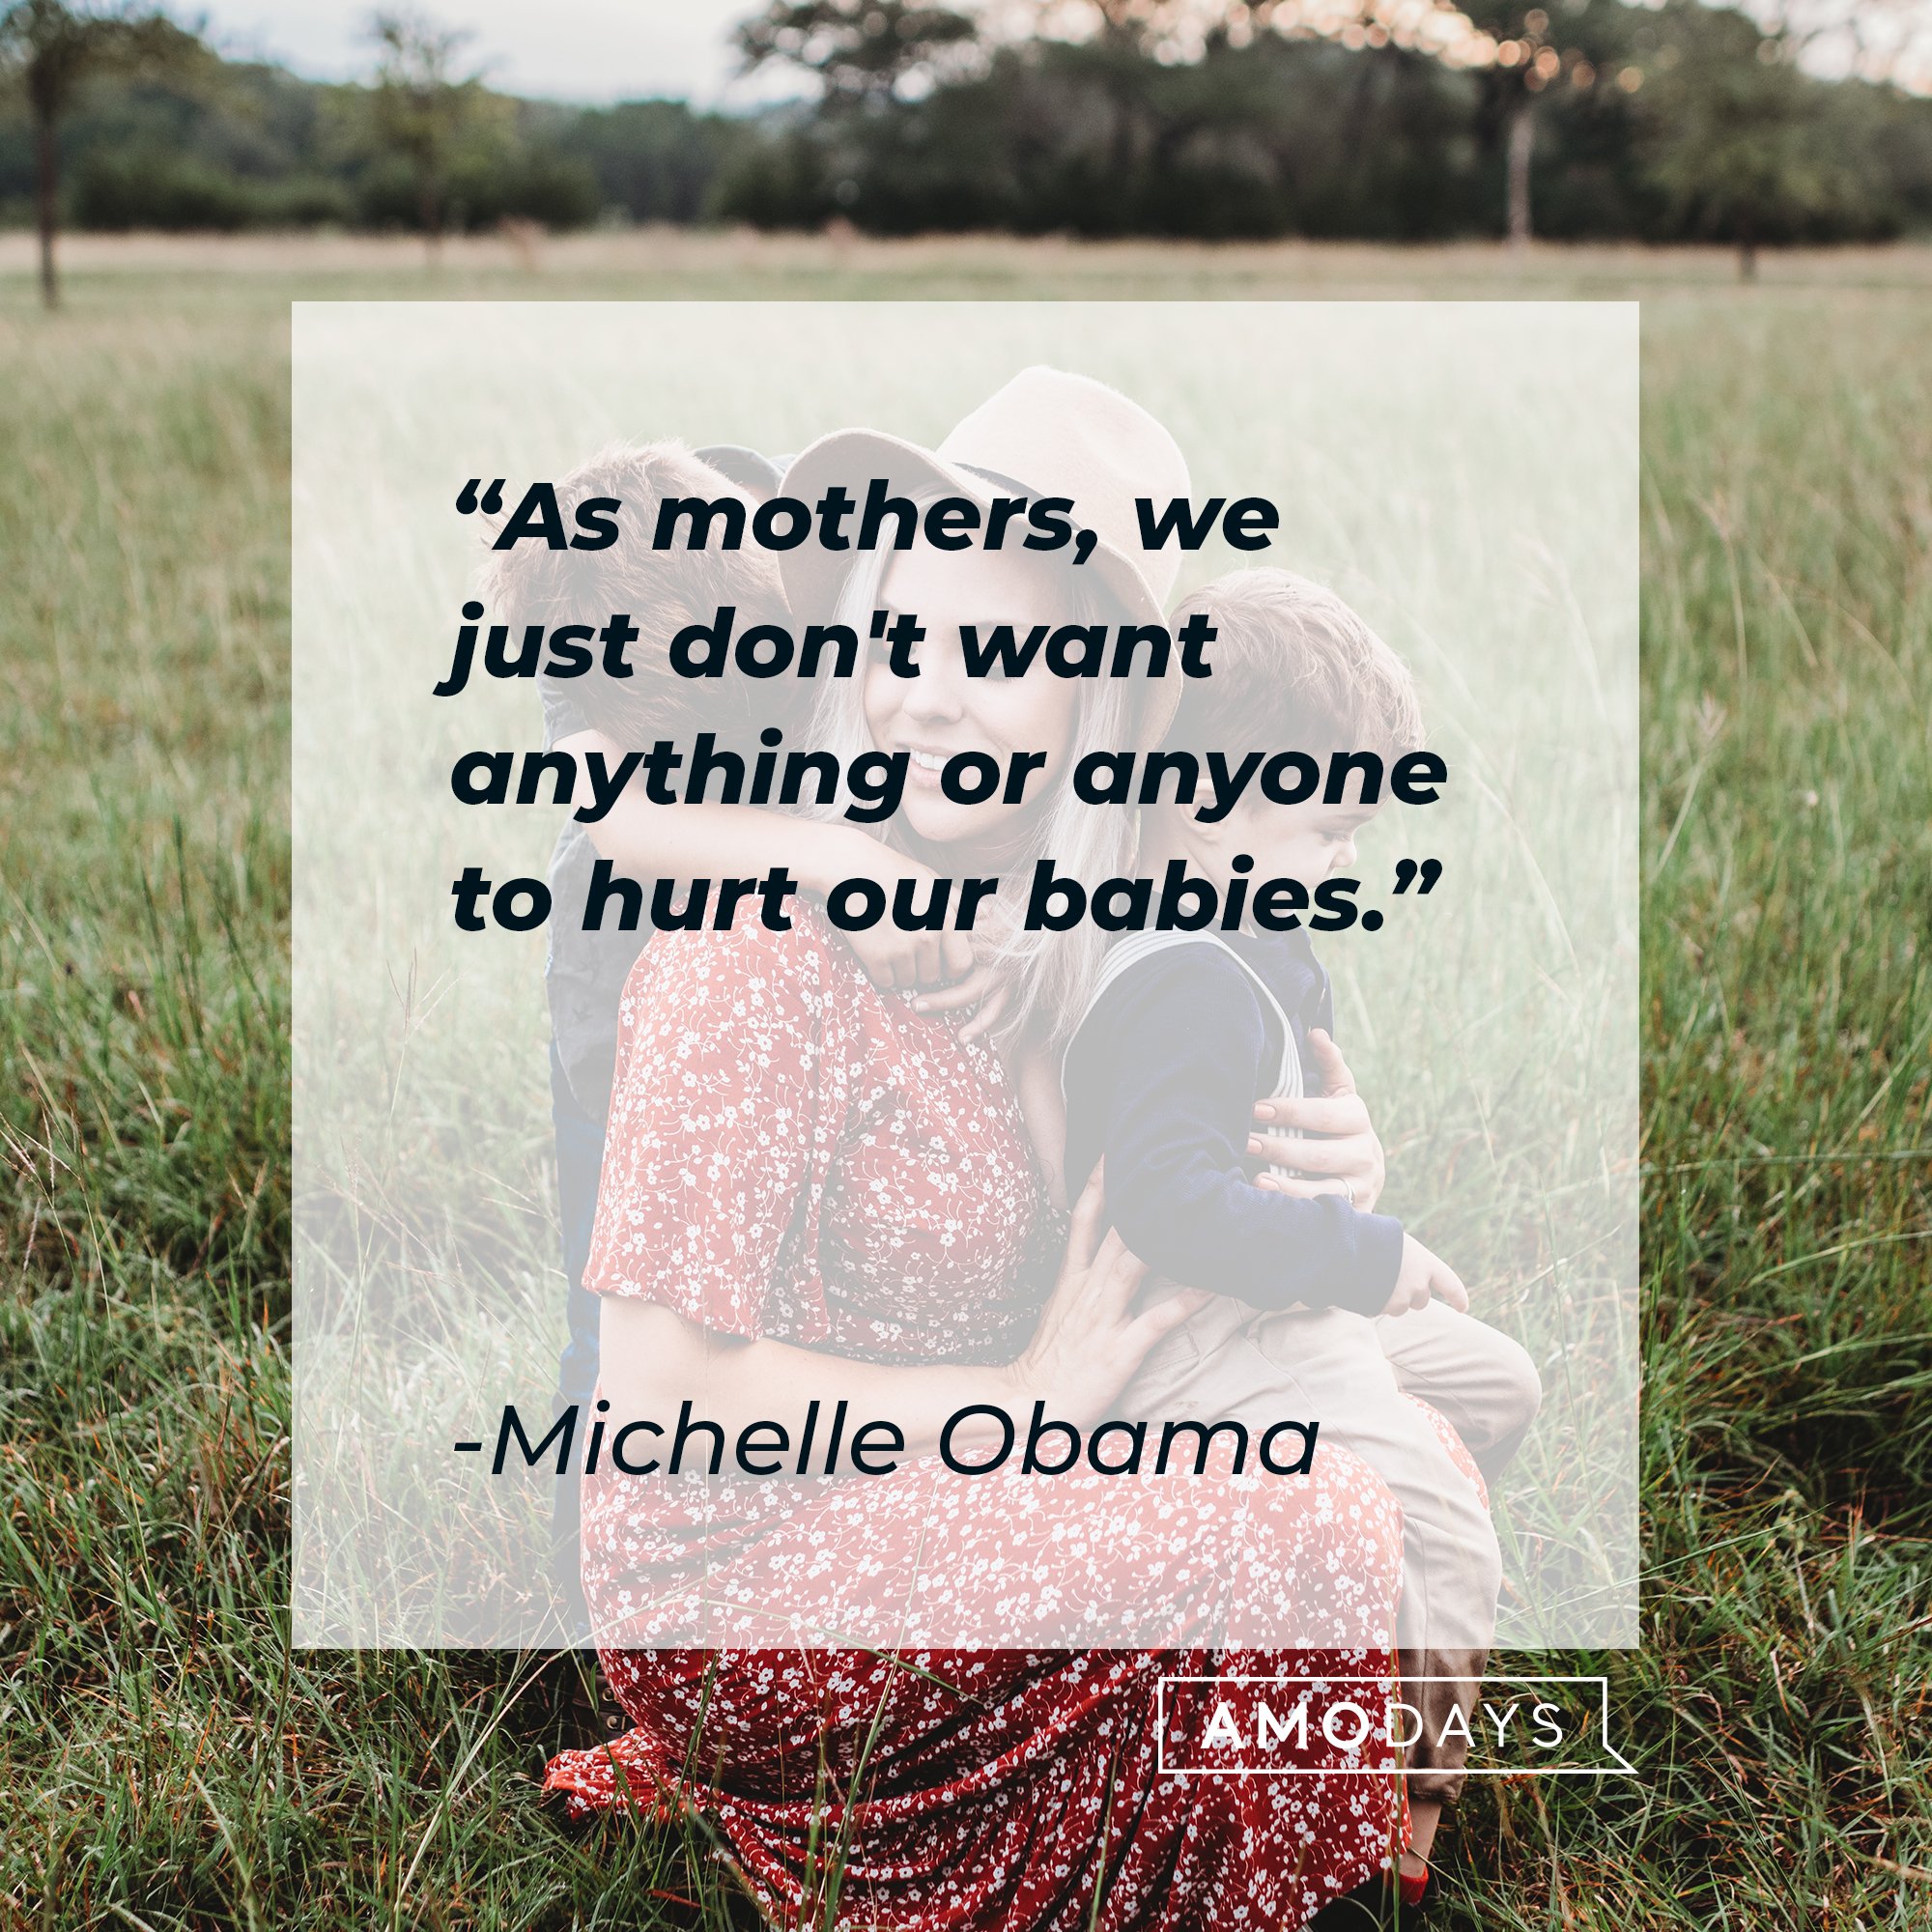 Michelle Obama's quote: "As mothers, we just don't want anything or anyone to hurt our babies." | Image: AmoDays